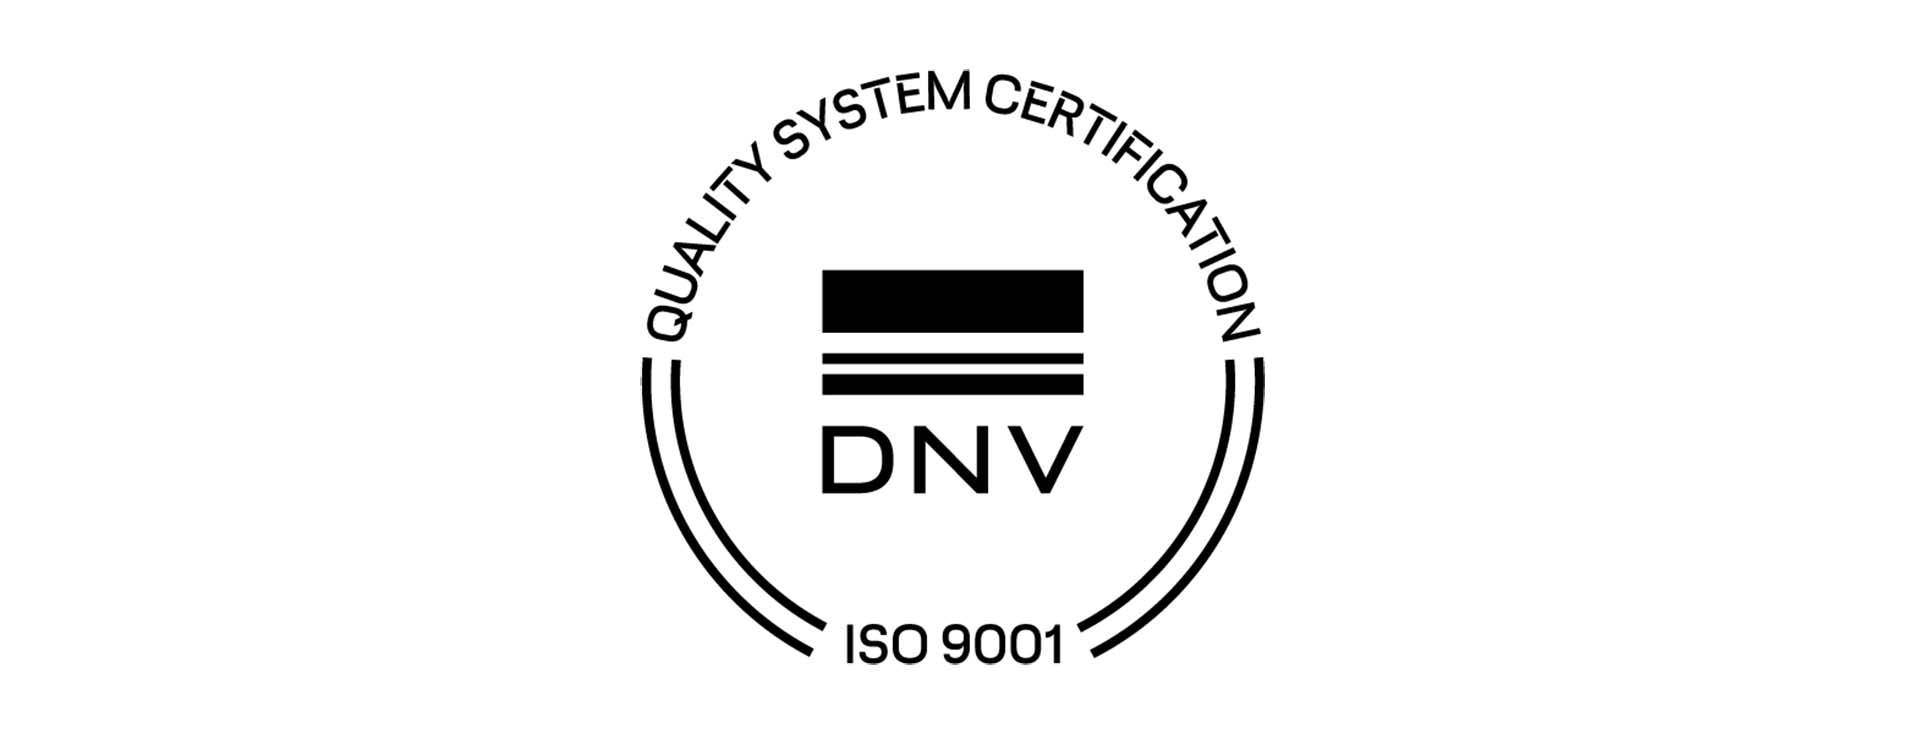 QualitySystCert_ISO9001_sito